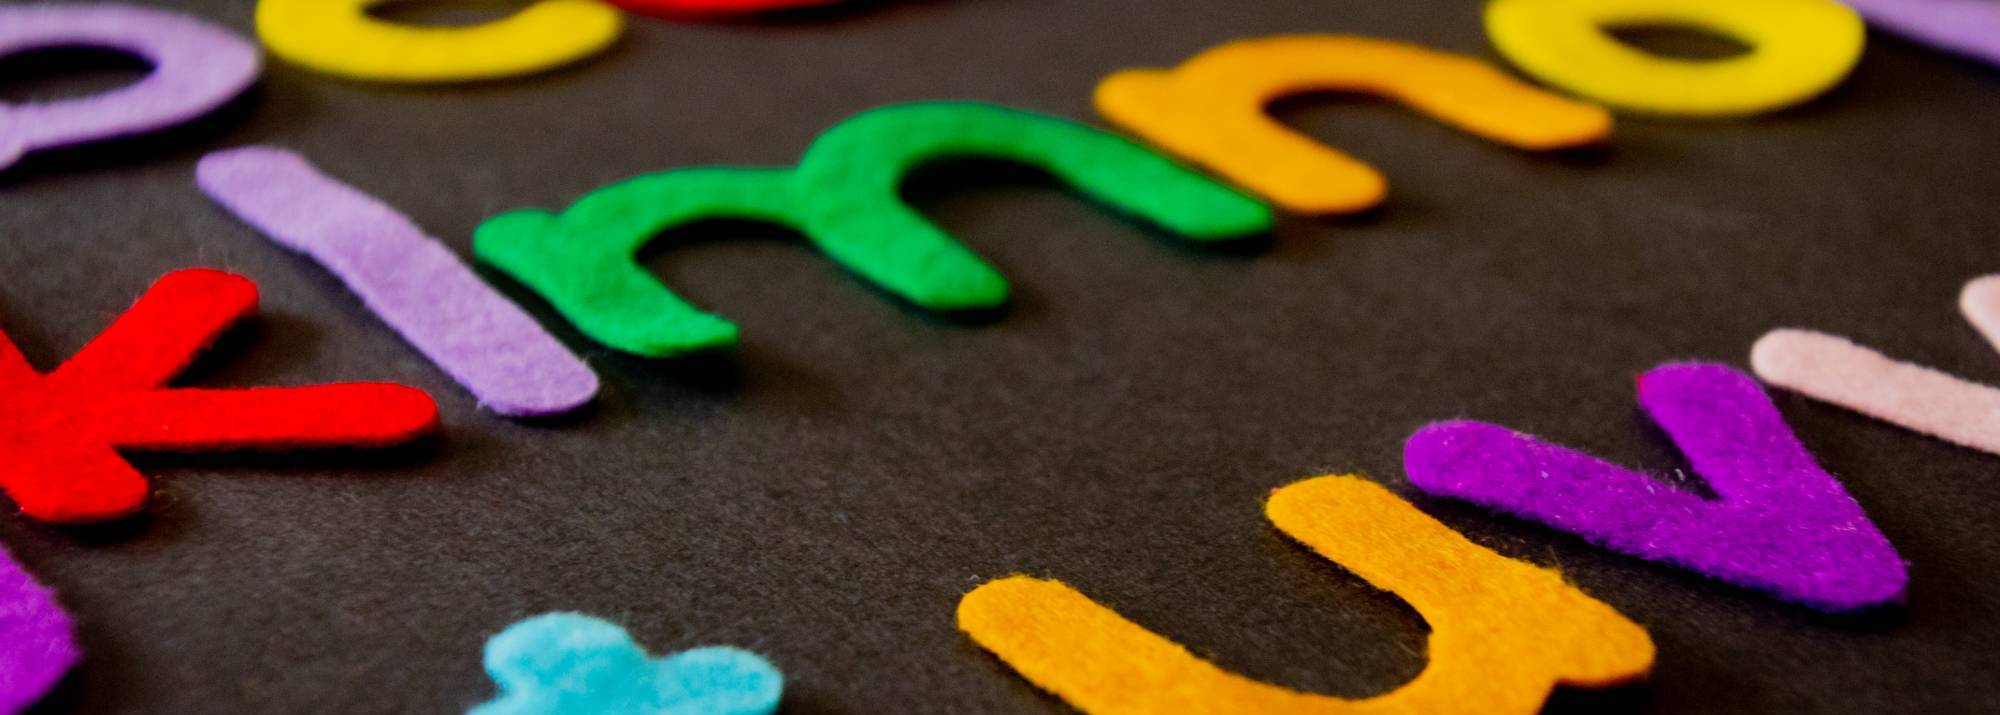 colorful felt letters on a black background